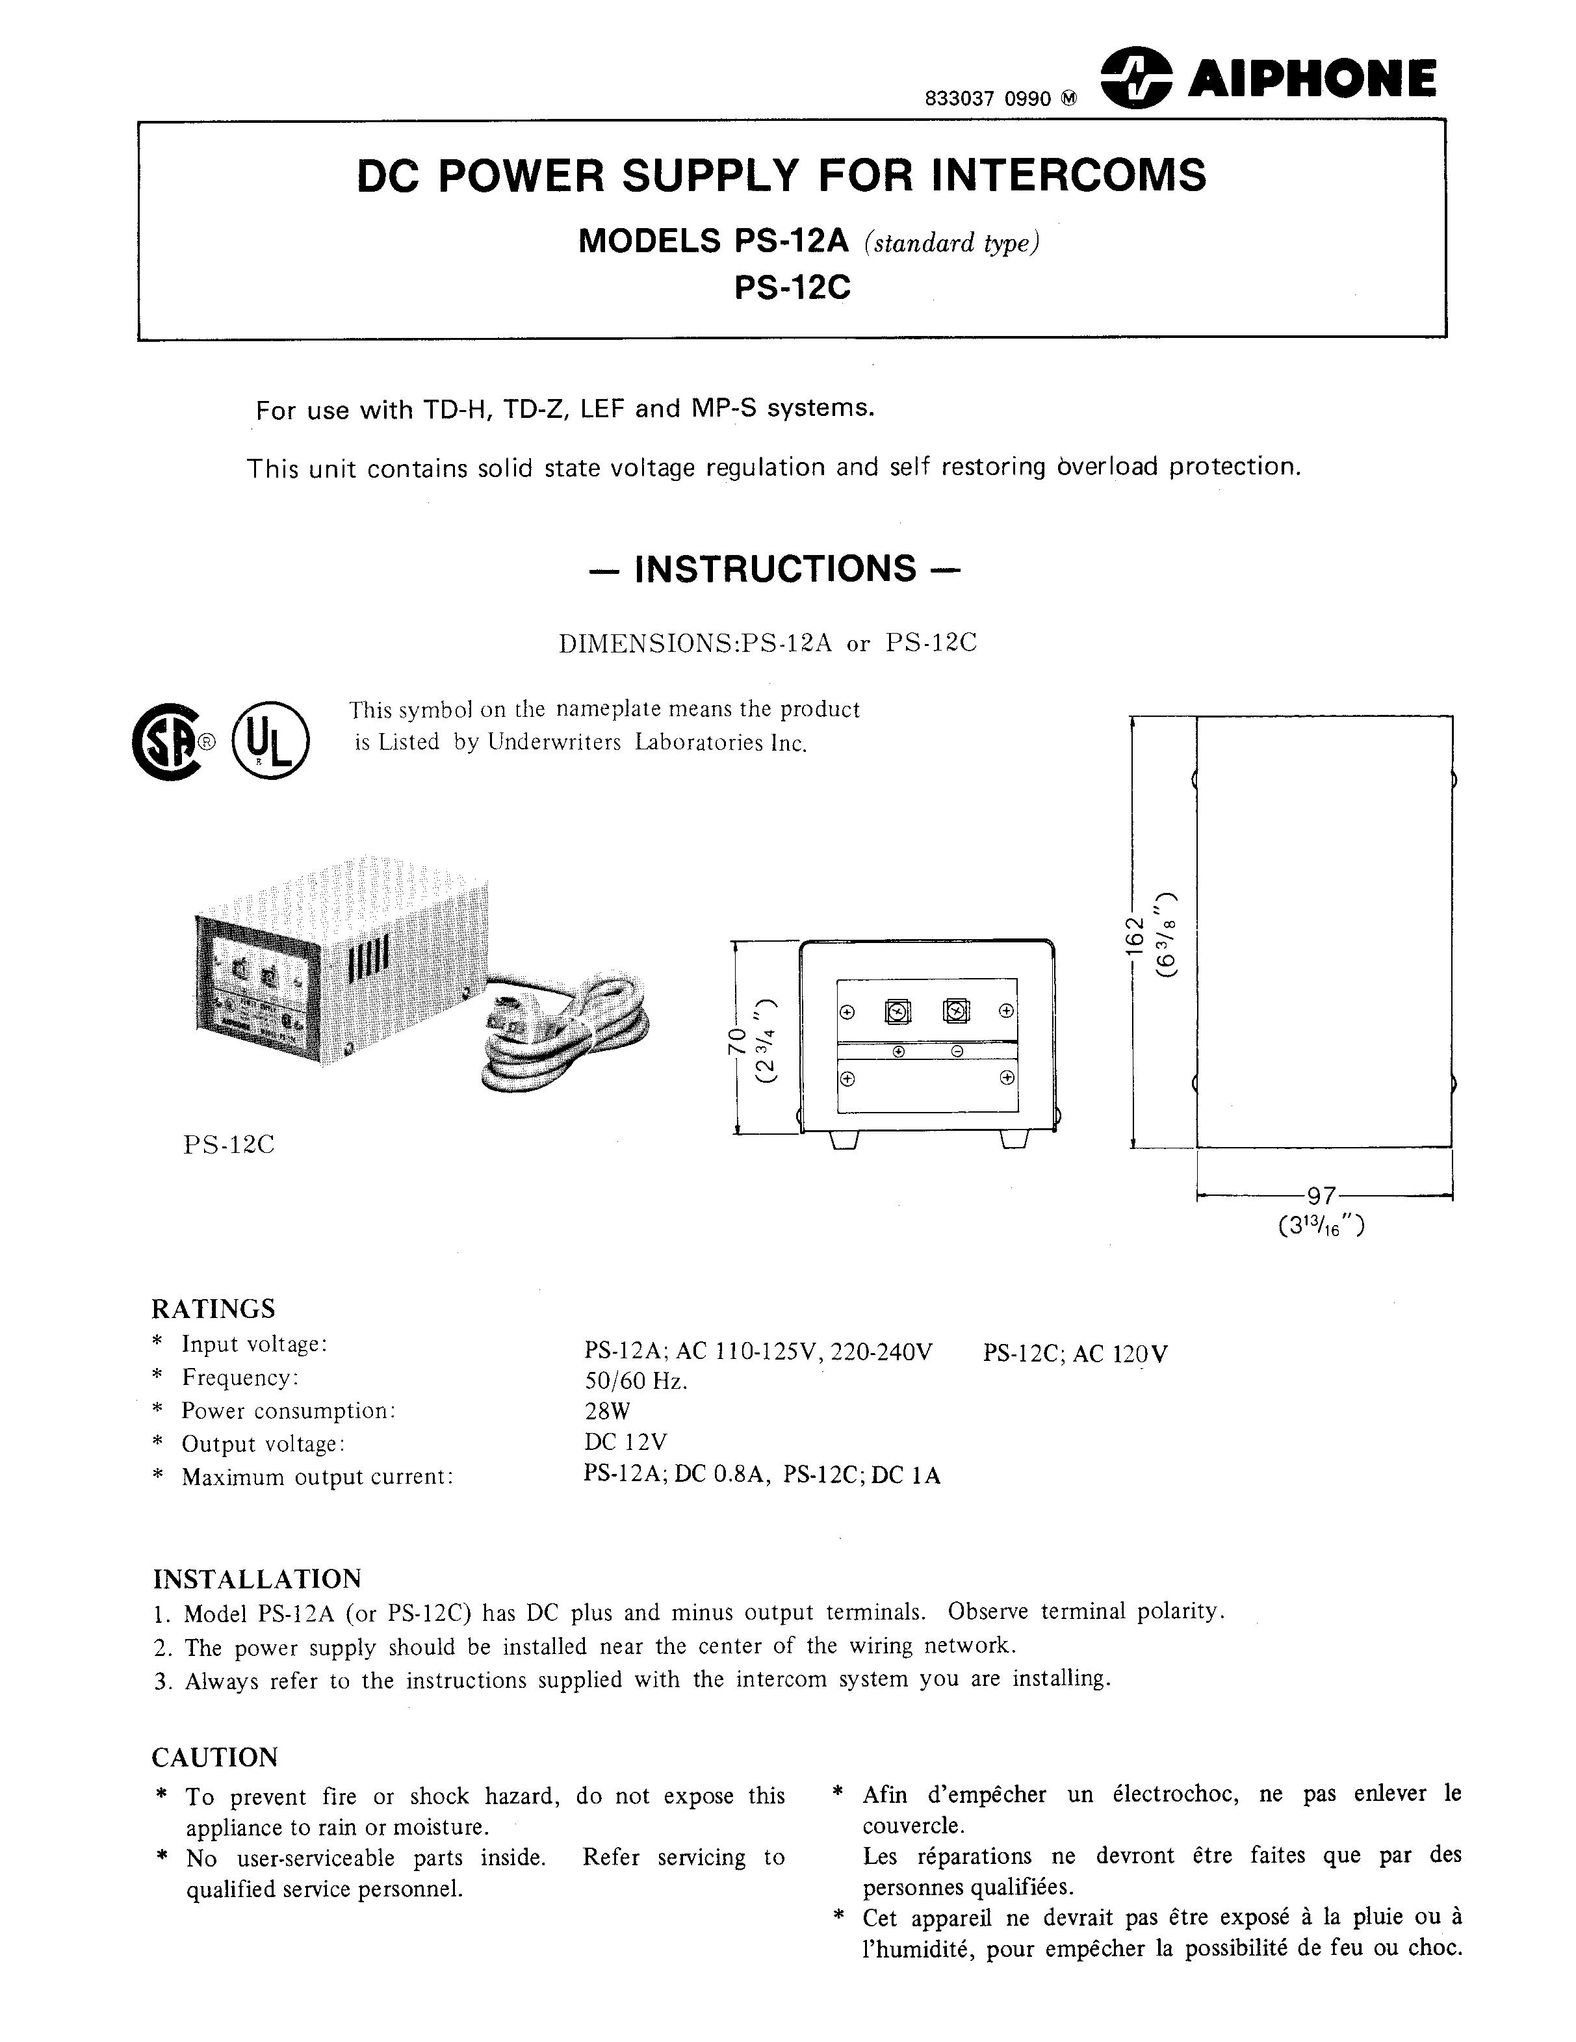 Aiphone PS-12C Power Supply User Manual